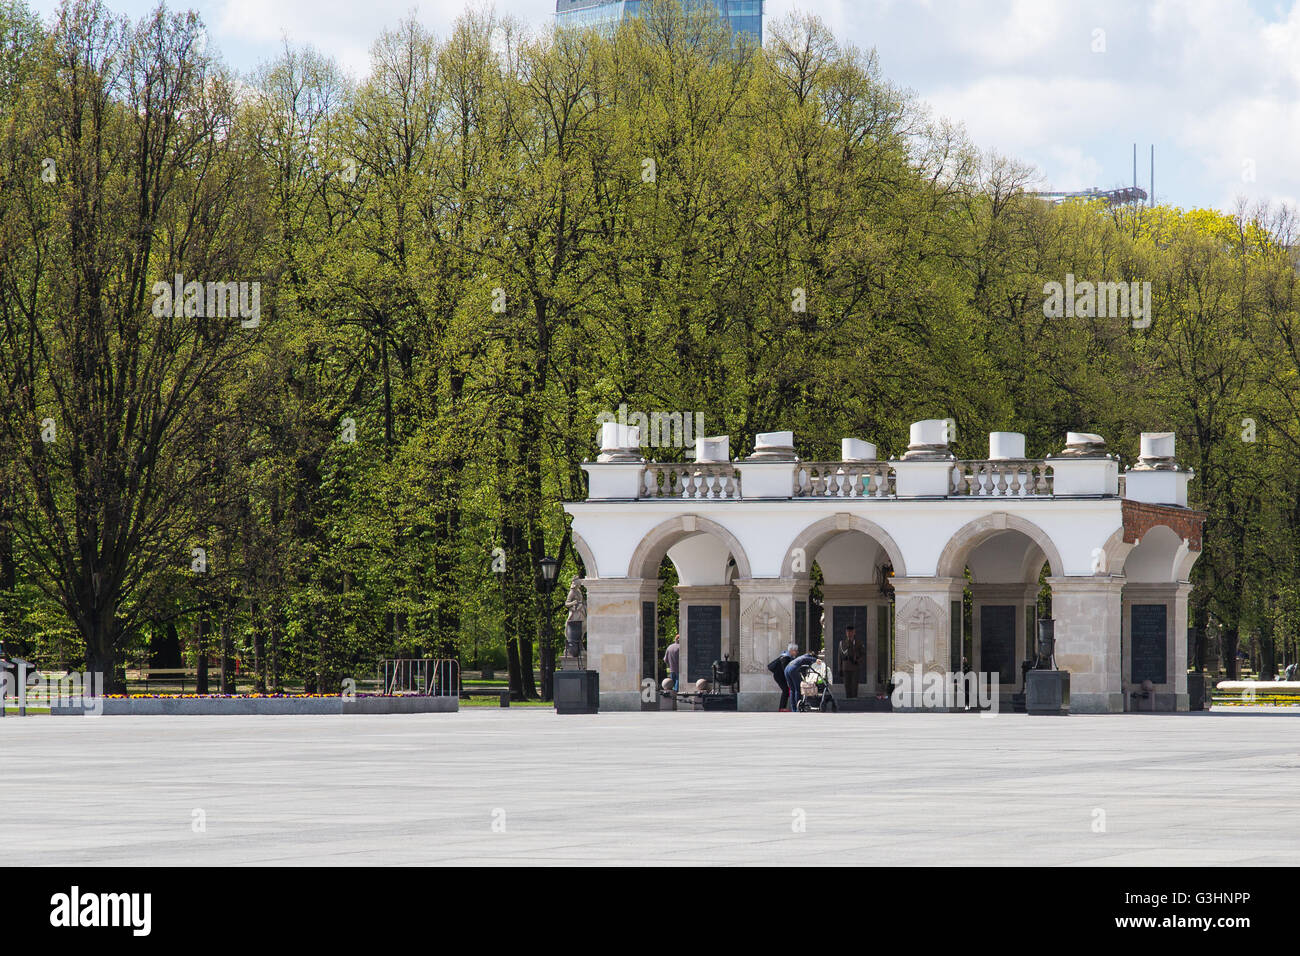 Warsaw, Poland. 21st Apr, 2016. The Tomb of the Unknown Soldier (Polish: Grob Nieznanego Zolnierza) is a monument in Warsaw, Poland, dedicated to the unknown soldiers who have given their lives for Poland. © Mateusz Wlodarczyk/Pacific Press/Alamy Live News Stock Photo